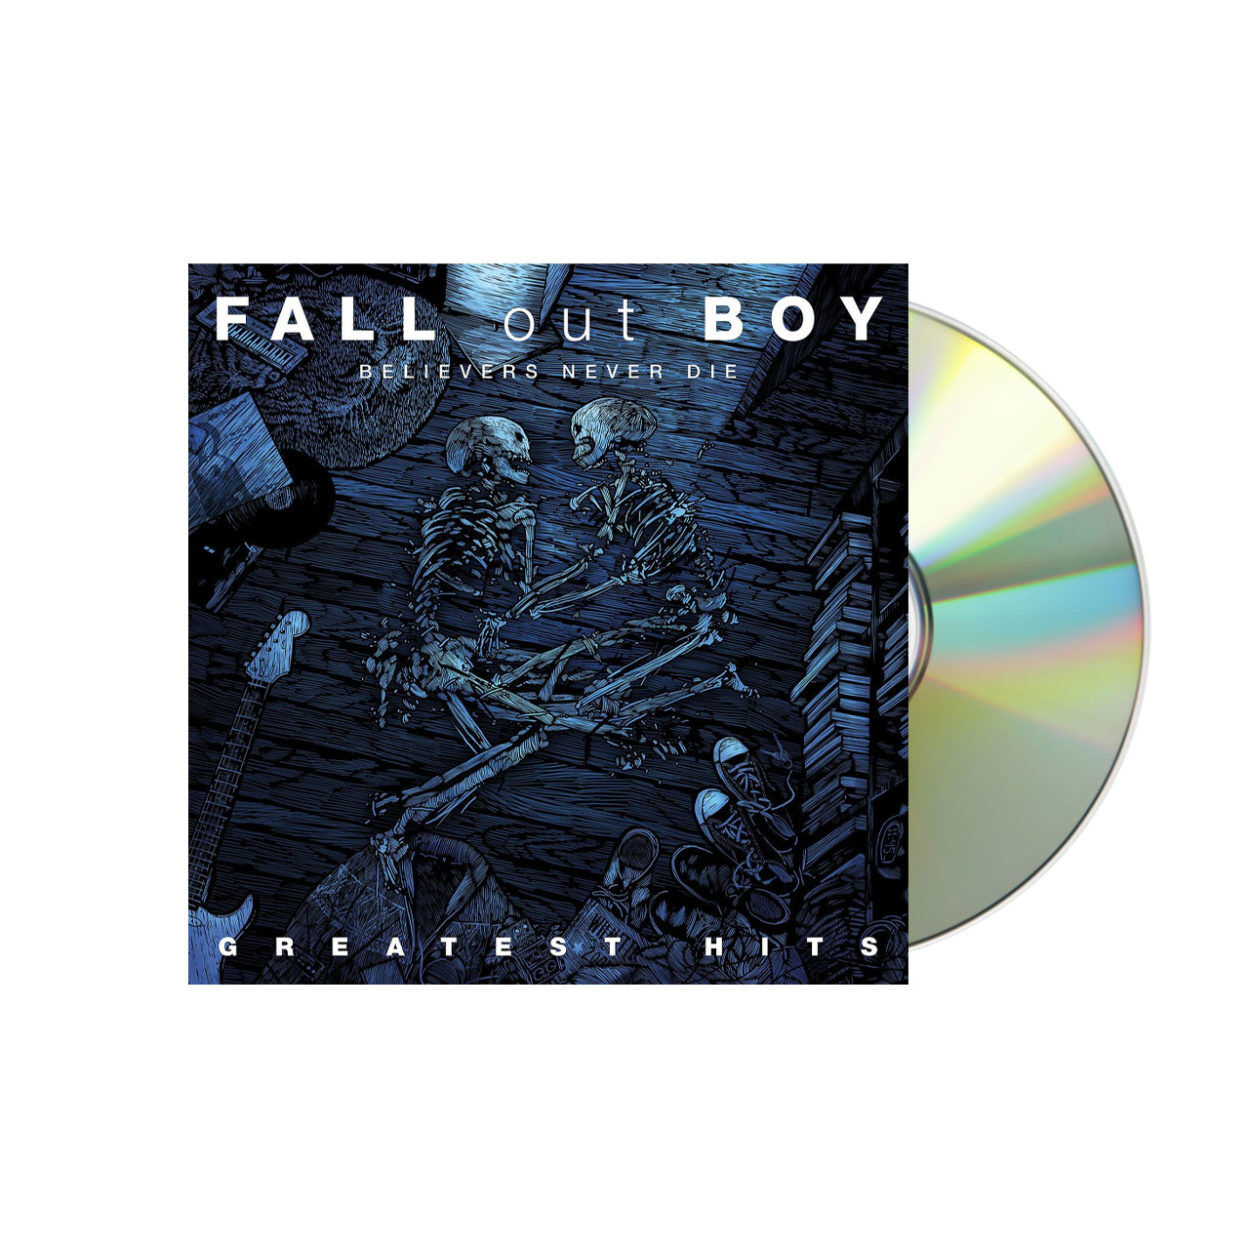 Fall Out Boy Believers Never Die - Greatest Hits Volume 1 CD